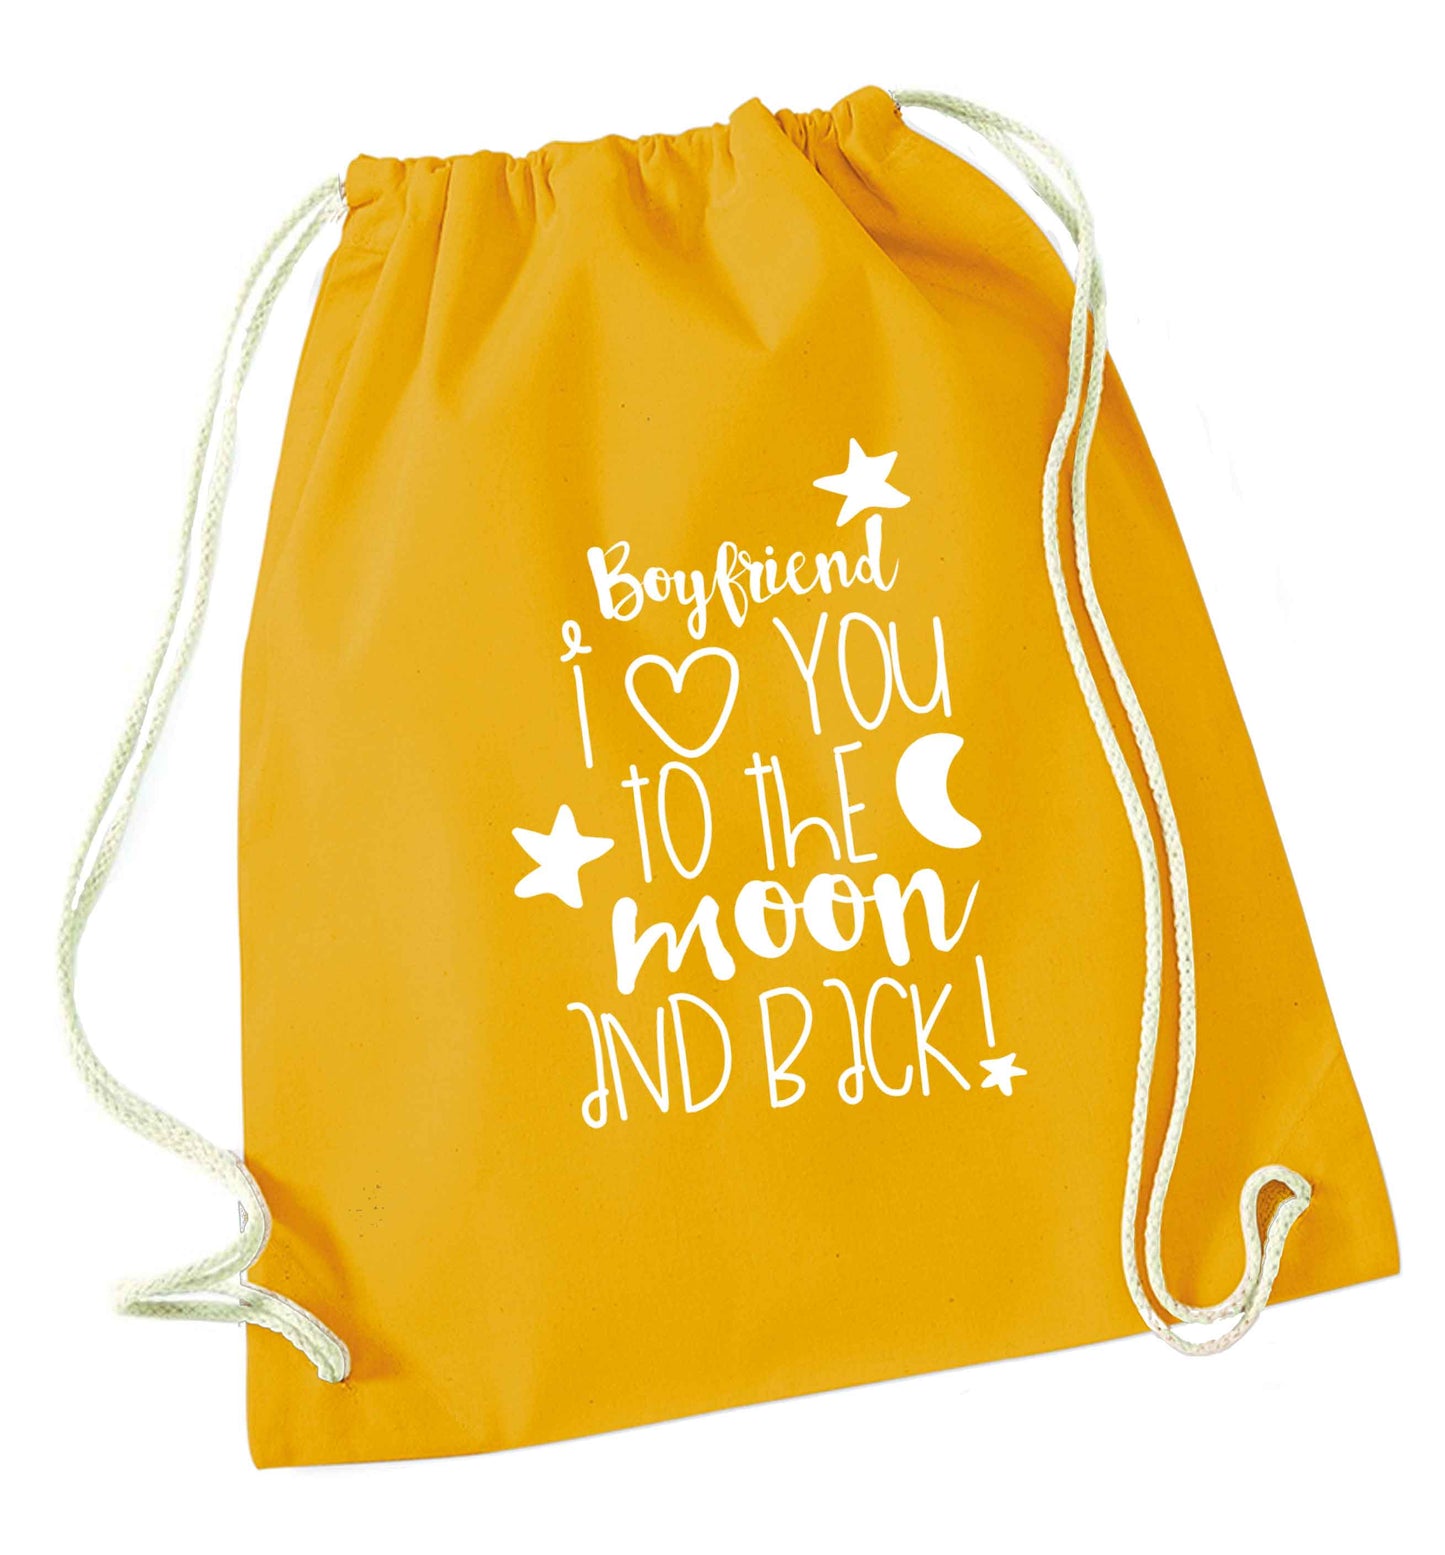 Boyfriend I love you to the moon and back mustard drawstring bag